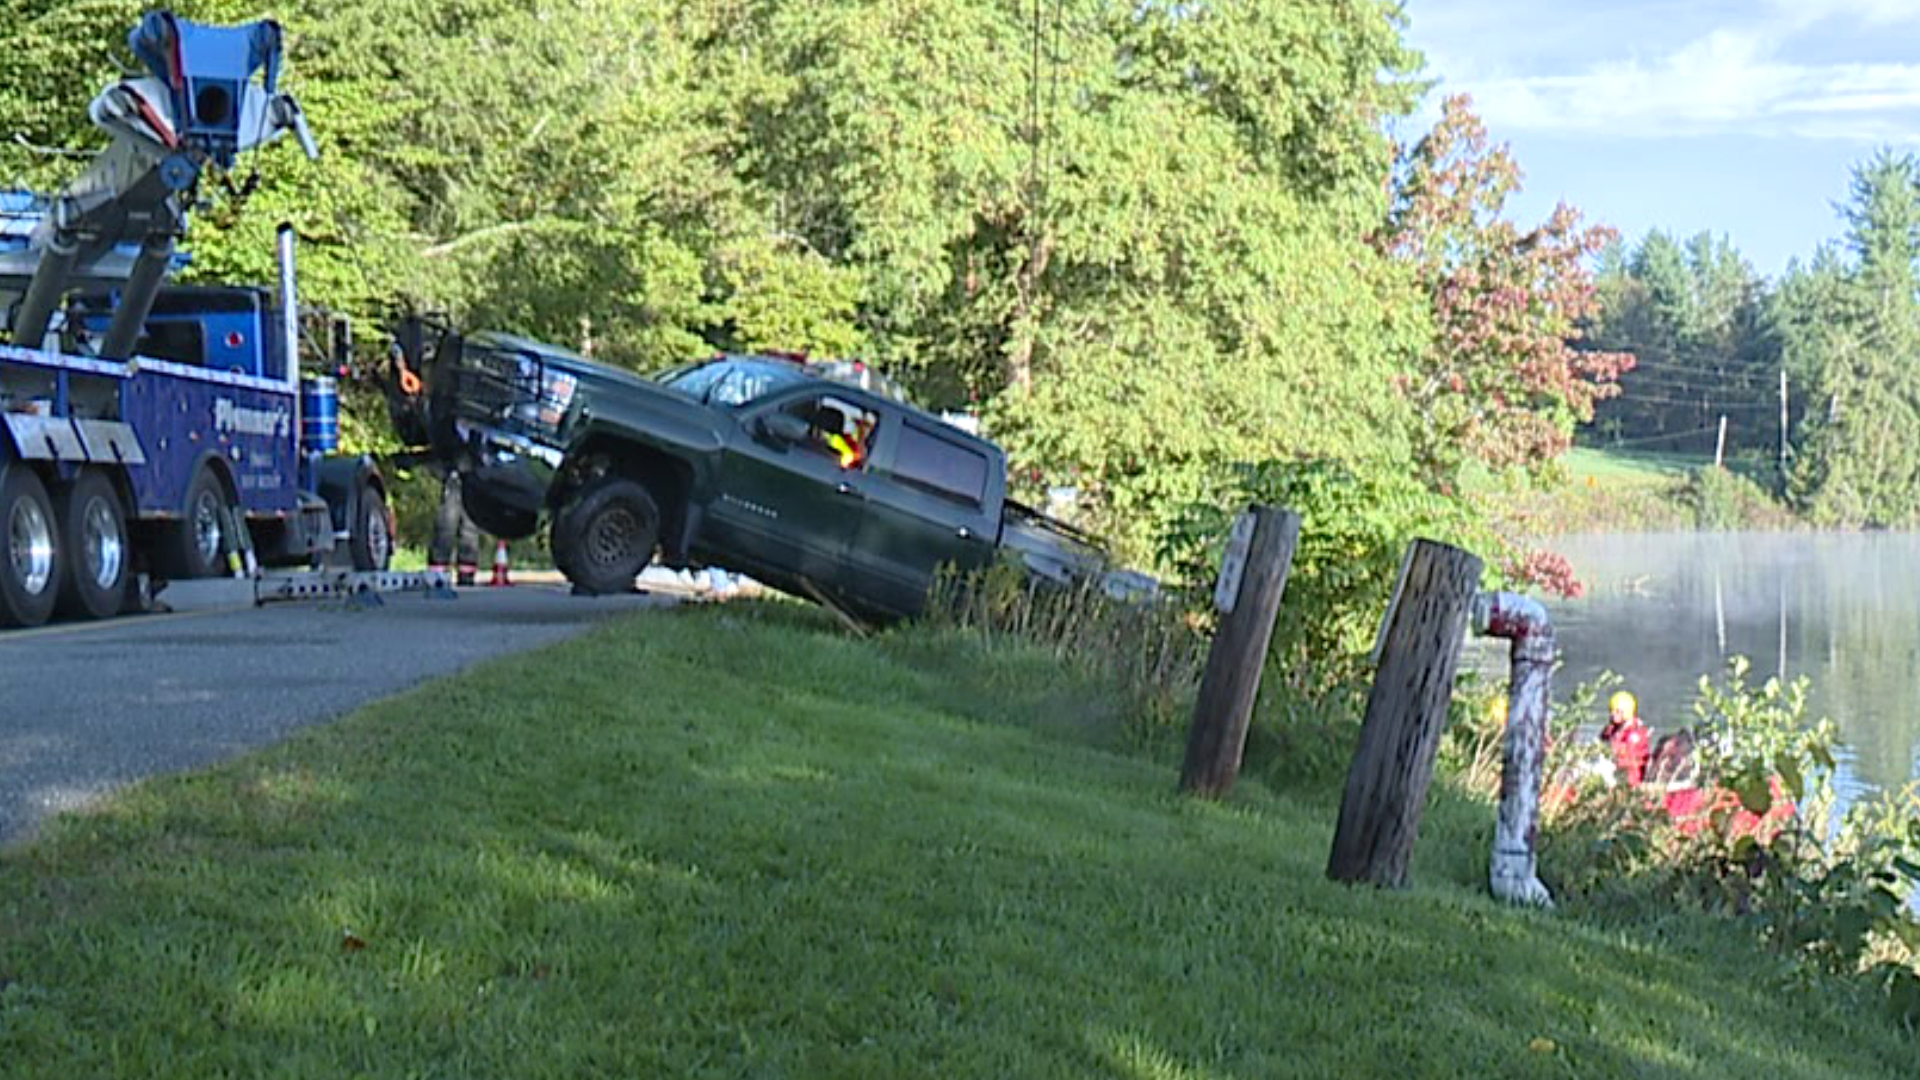 Troopers believe the driver was under the influence when his truck ended up submerged in a pond in Susquehanna County.